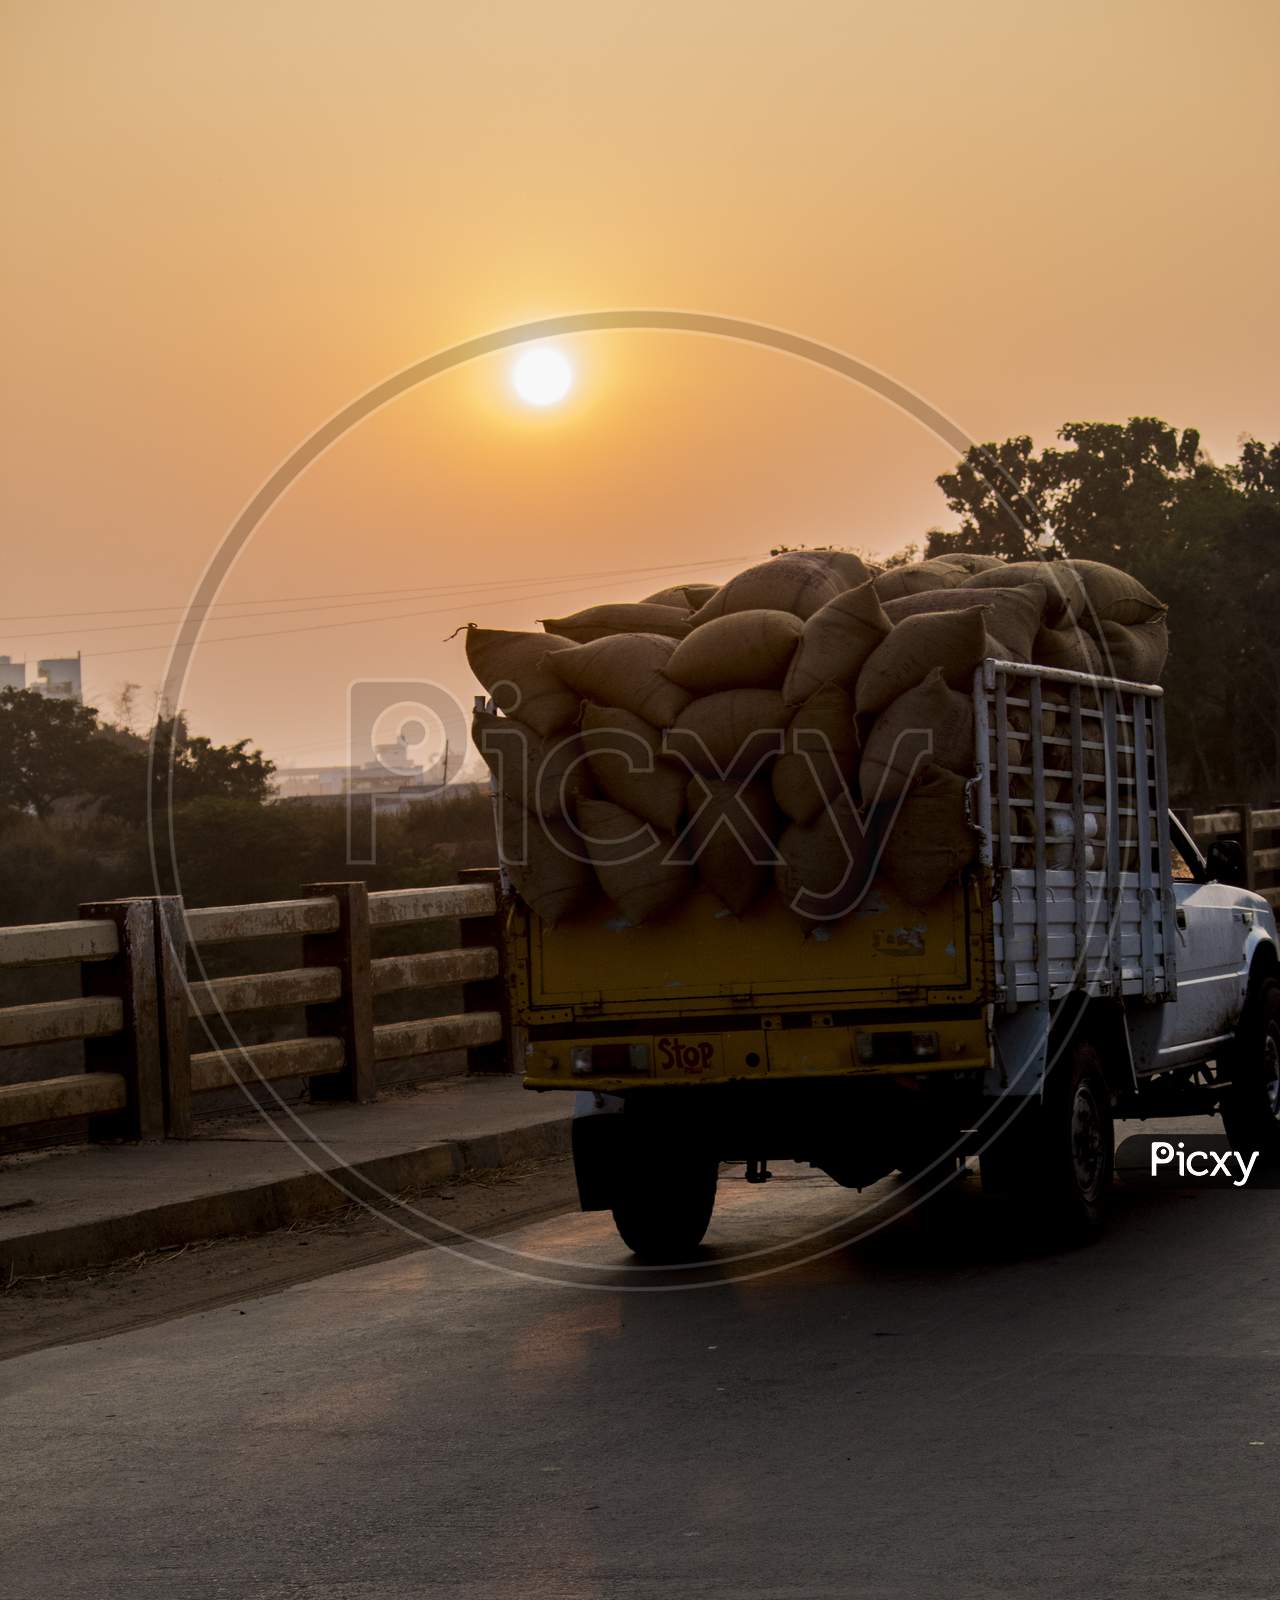 A Mini Truck  On a Bridge With Sunset Sun In Background